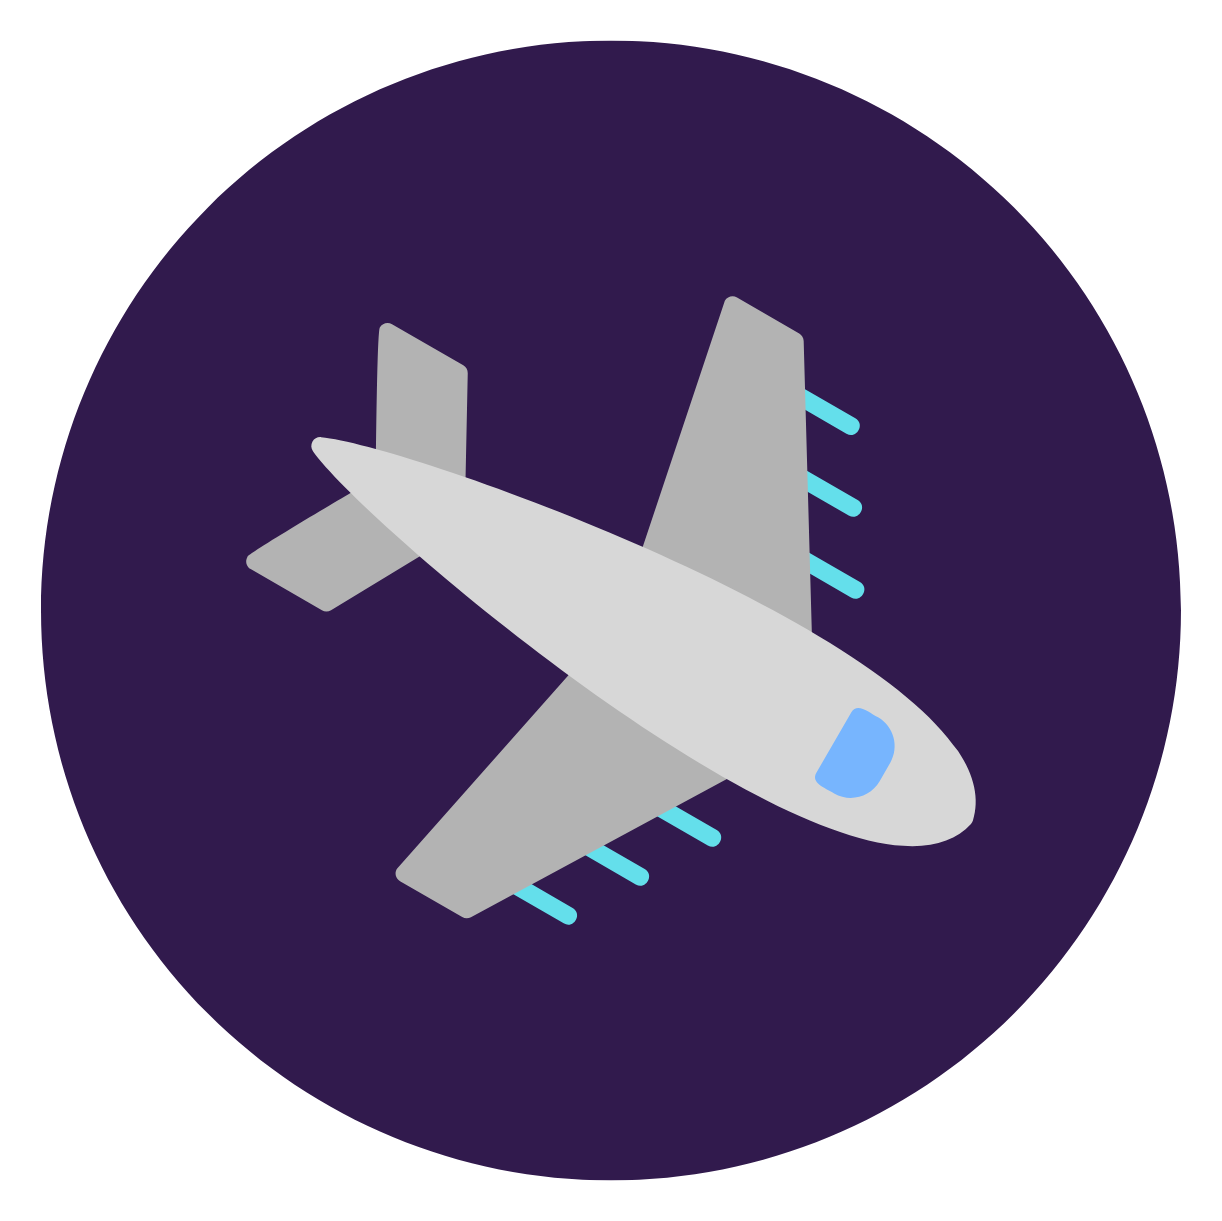 An icon with an airplane in a purple circle